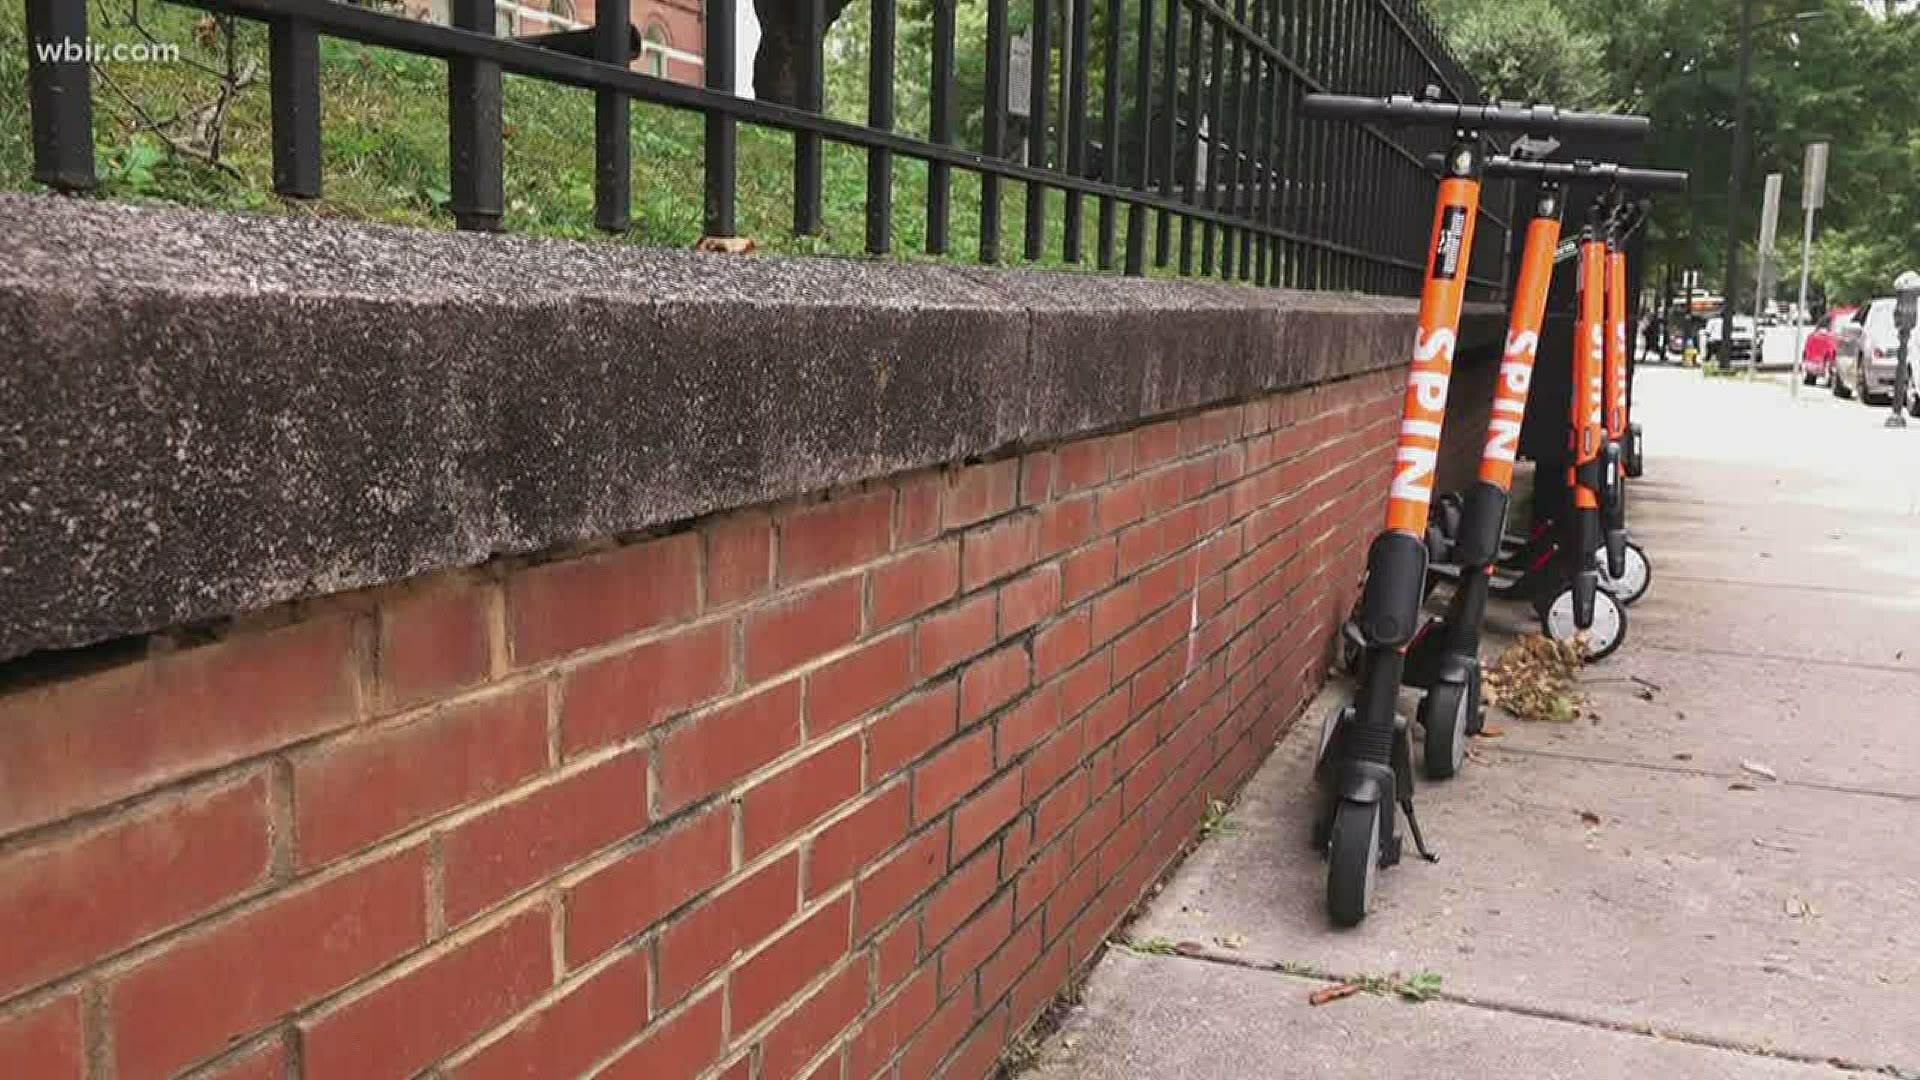 The date for the return of shared bikes and scooters in Knoxville is still up in the air.